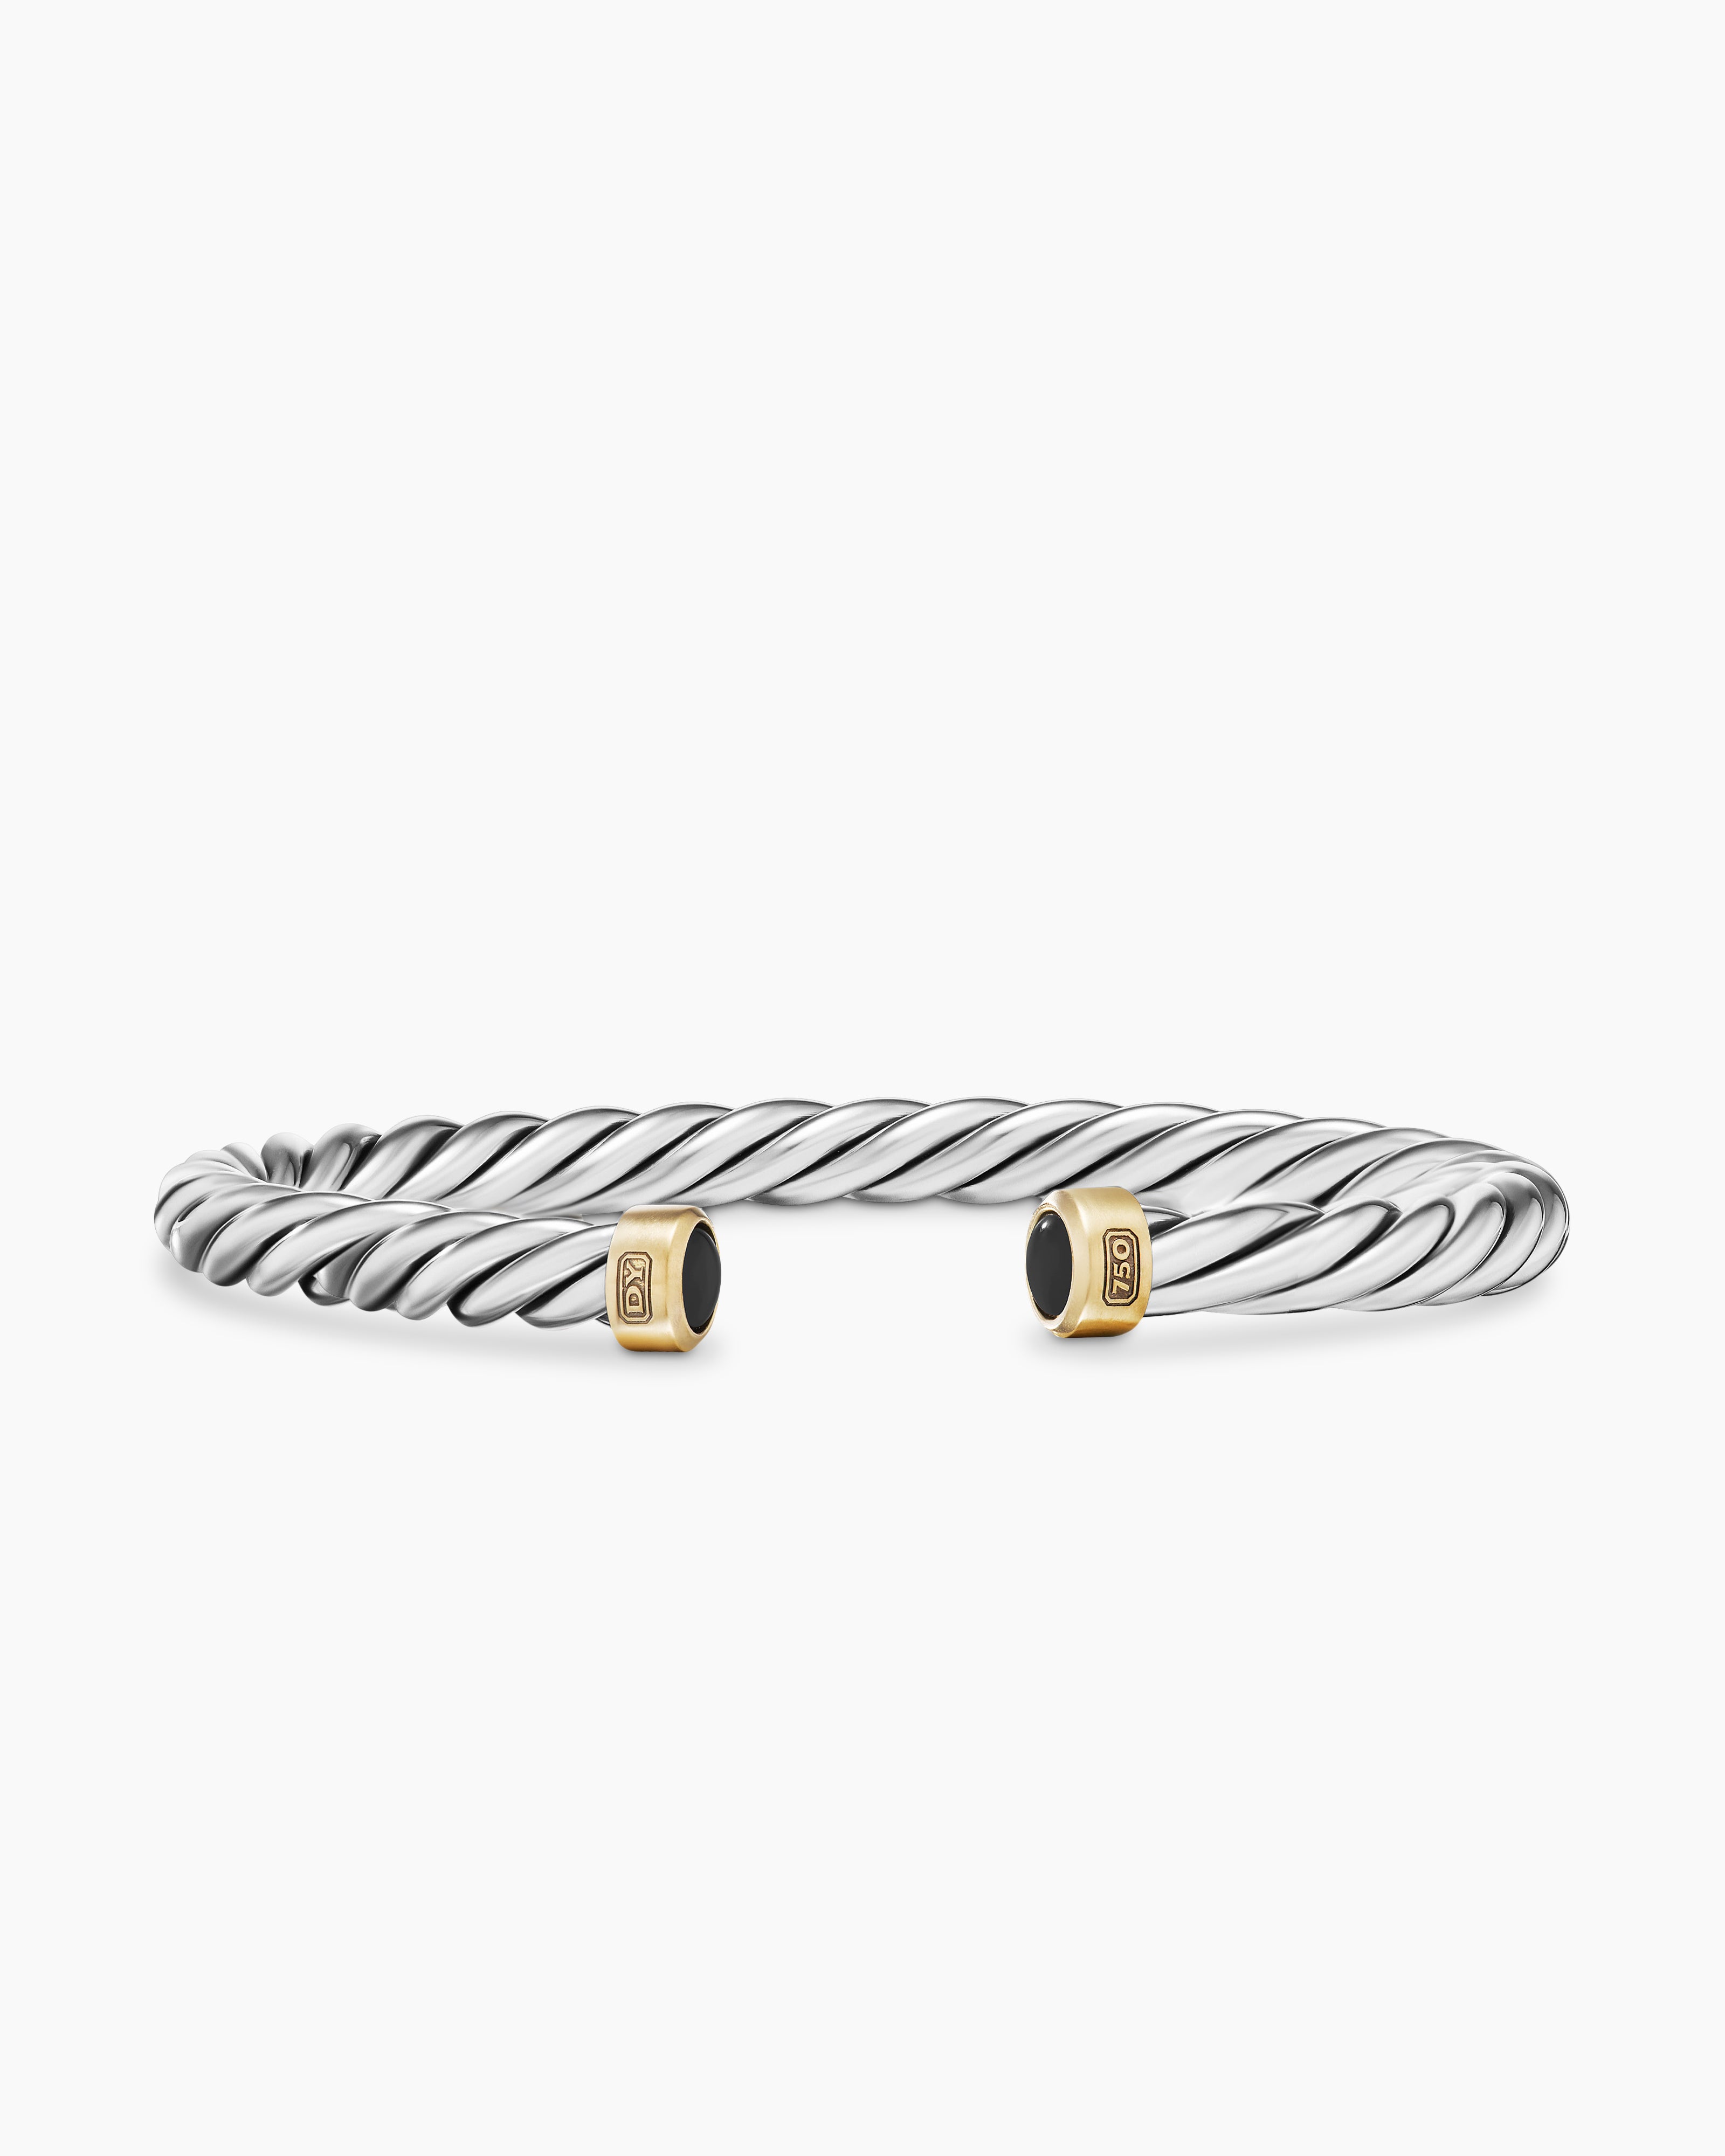 Yurman in | with David Sterling Bracelet Yellow Silver 18K Gold, 6mm Cuff Cable